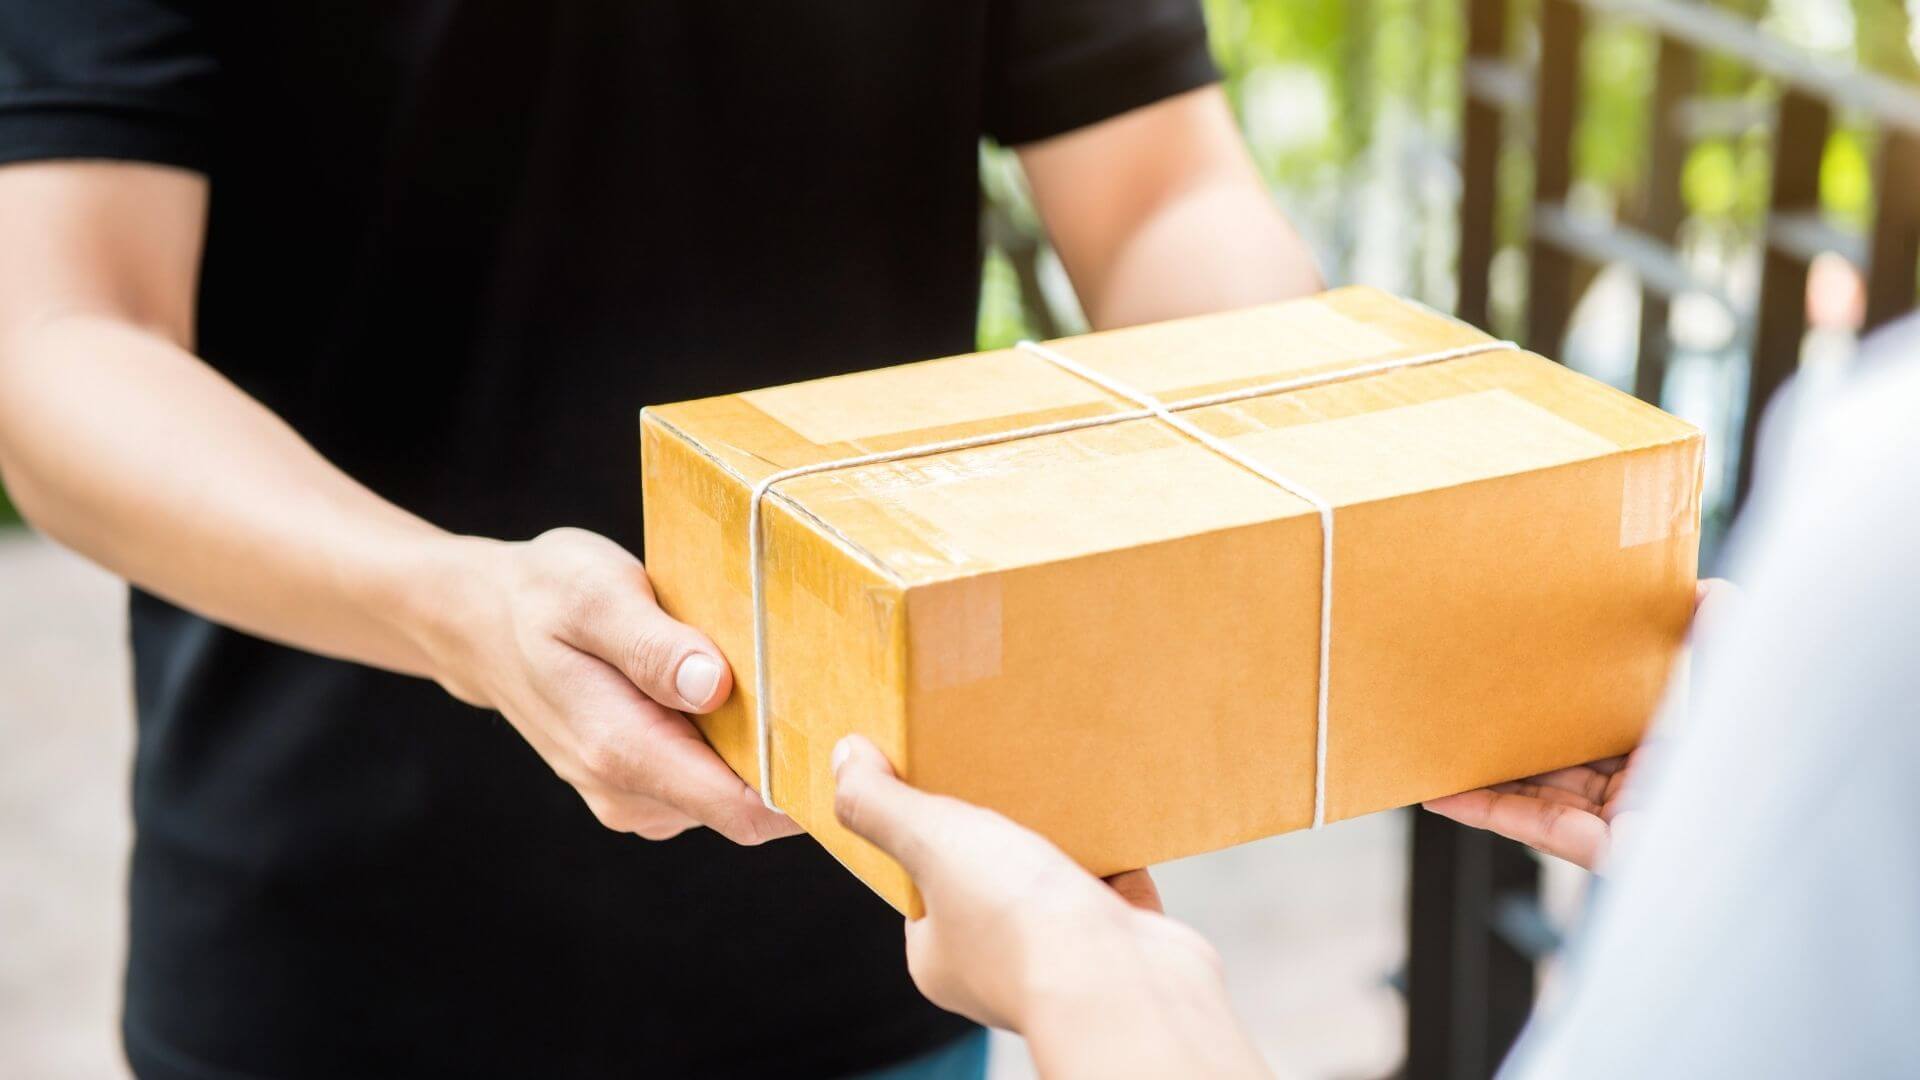 The Psychology Behind Free Shipping: Does It Work?